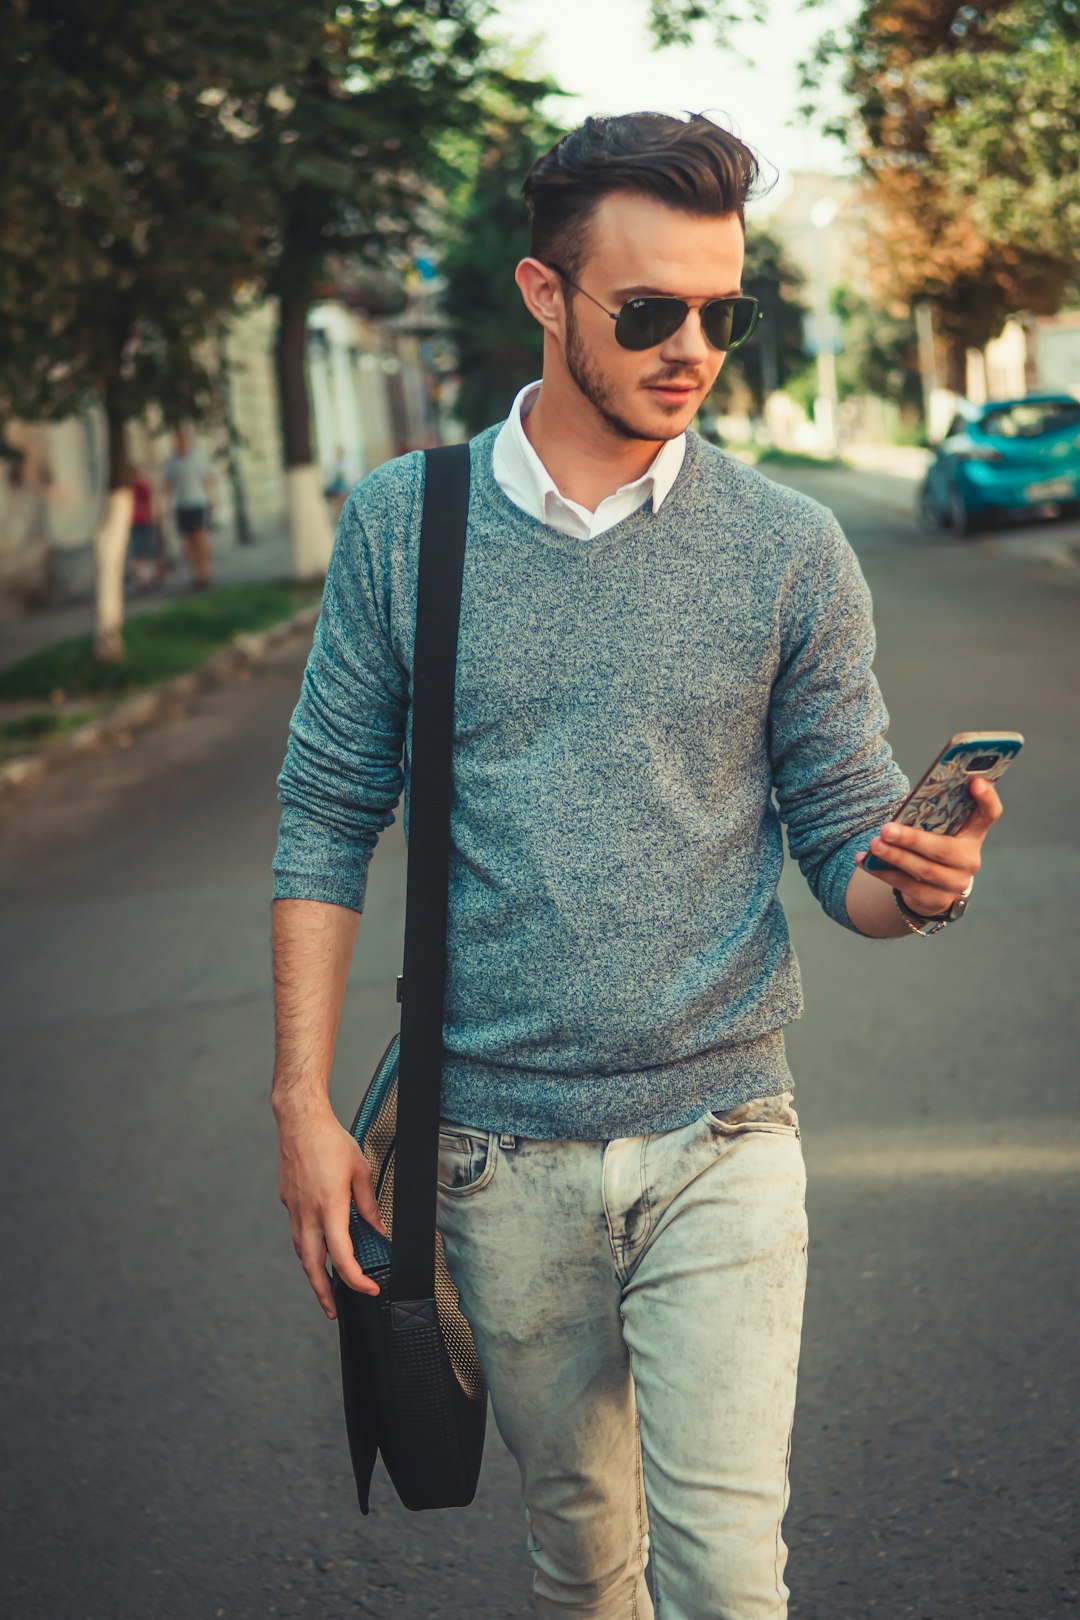 man in blue and gray polo shirt holding black smartphone